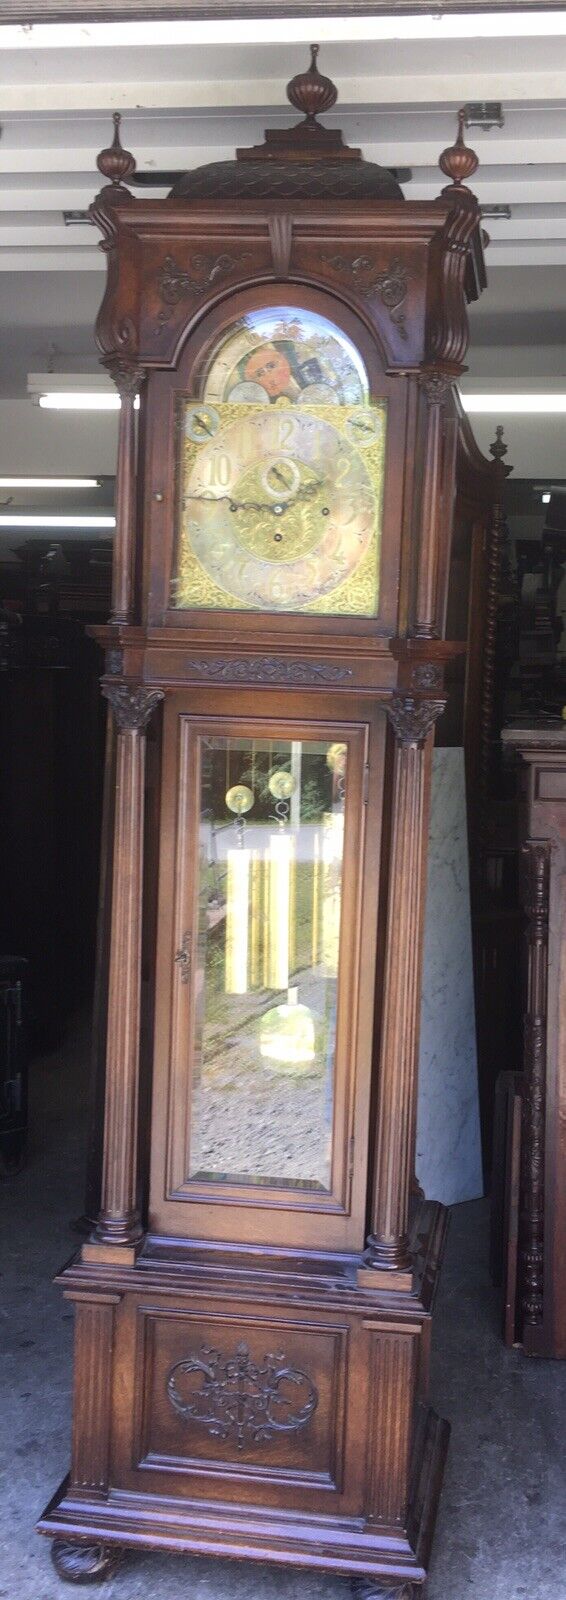 CARVED OAK ELLIOTT GRANDFATHER CLOCK WITH BELLS, WHITTINGTON AND WESTMINSTER